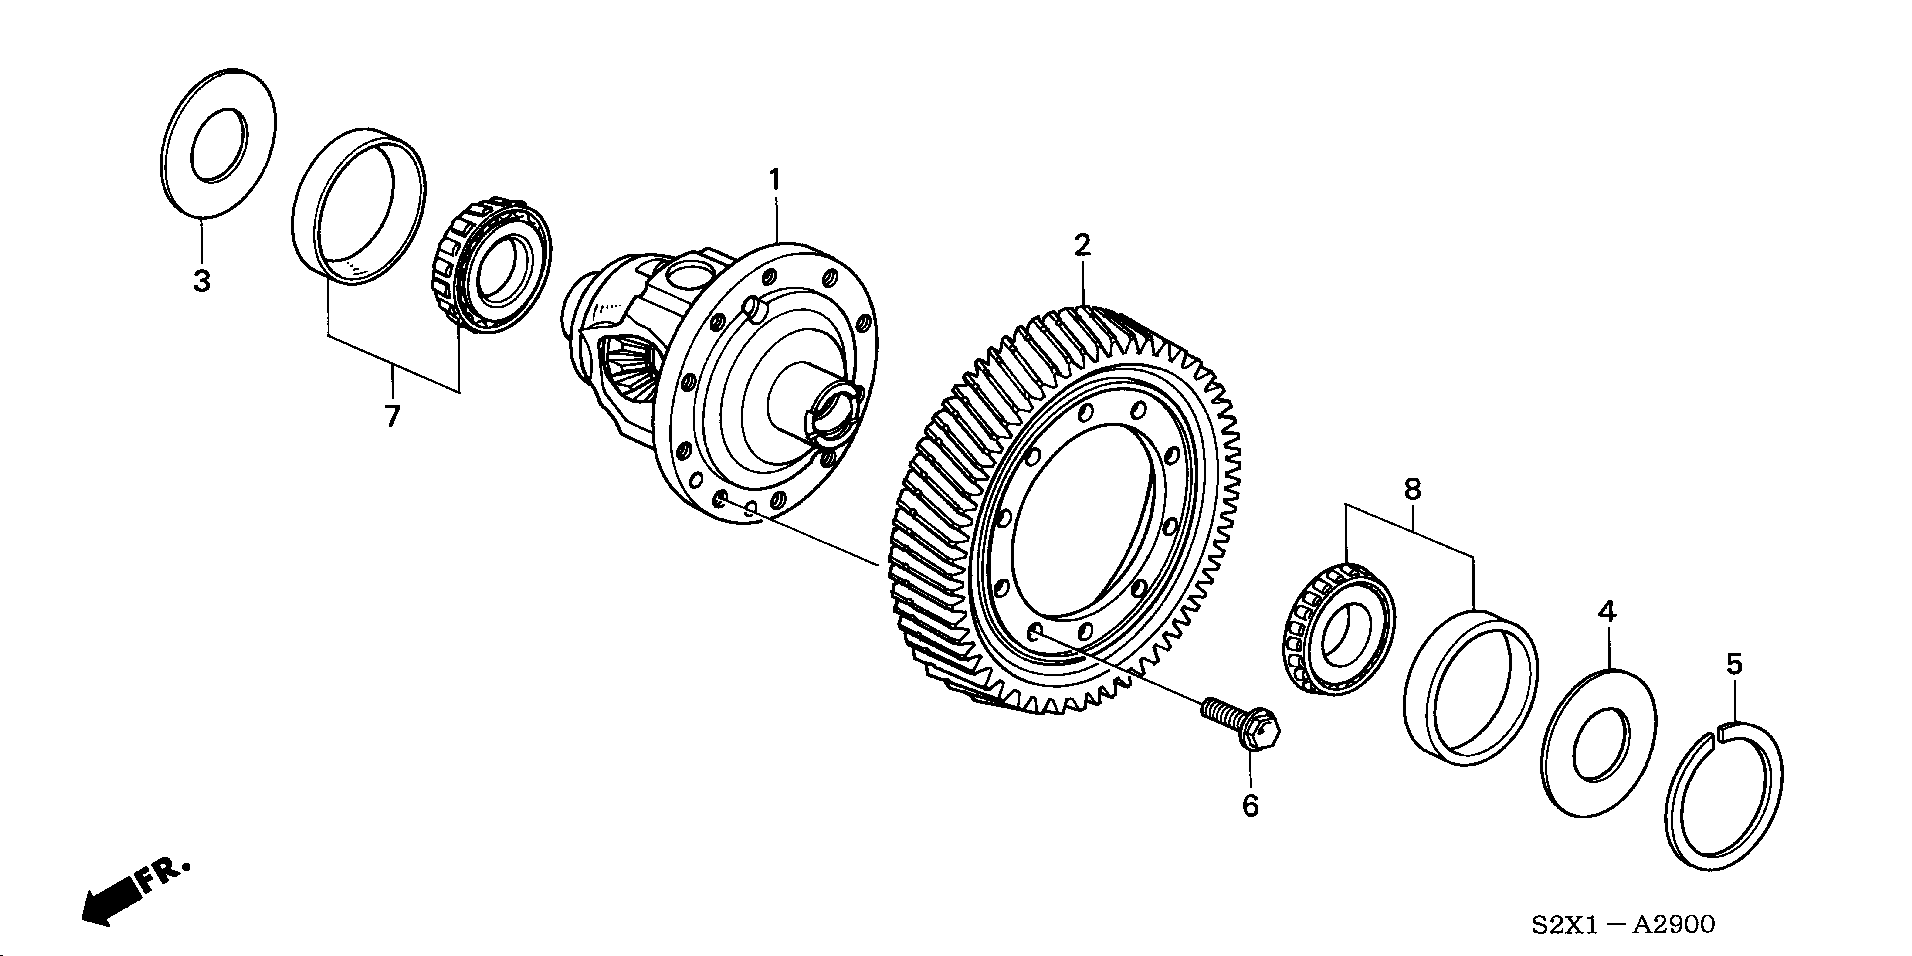 DIFFERENTIAL(V6) (2WD)